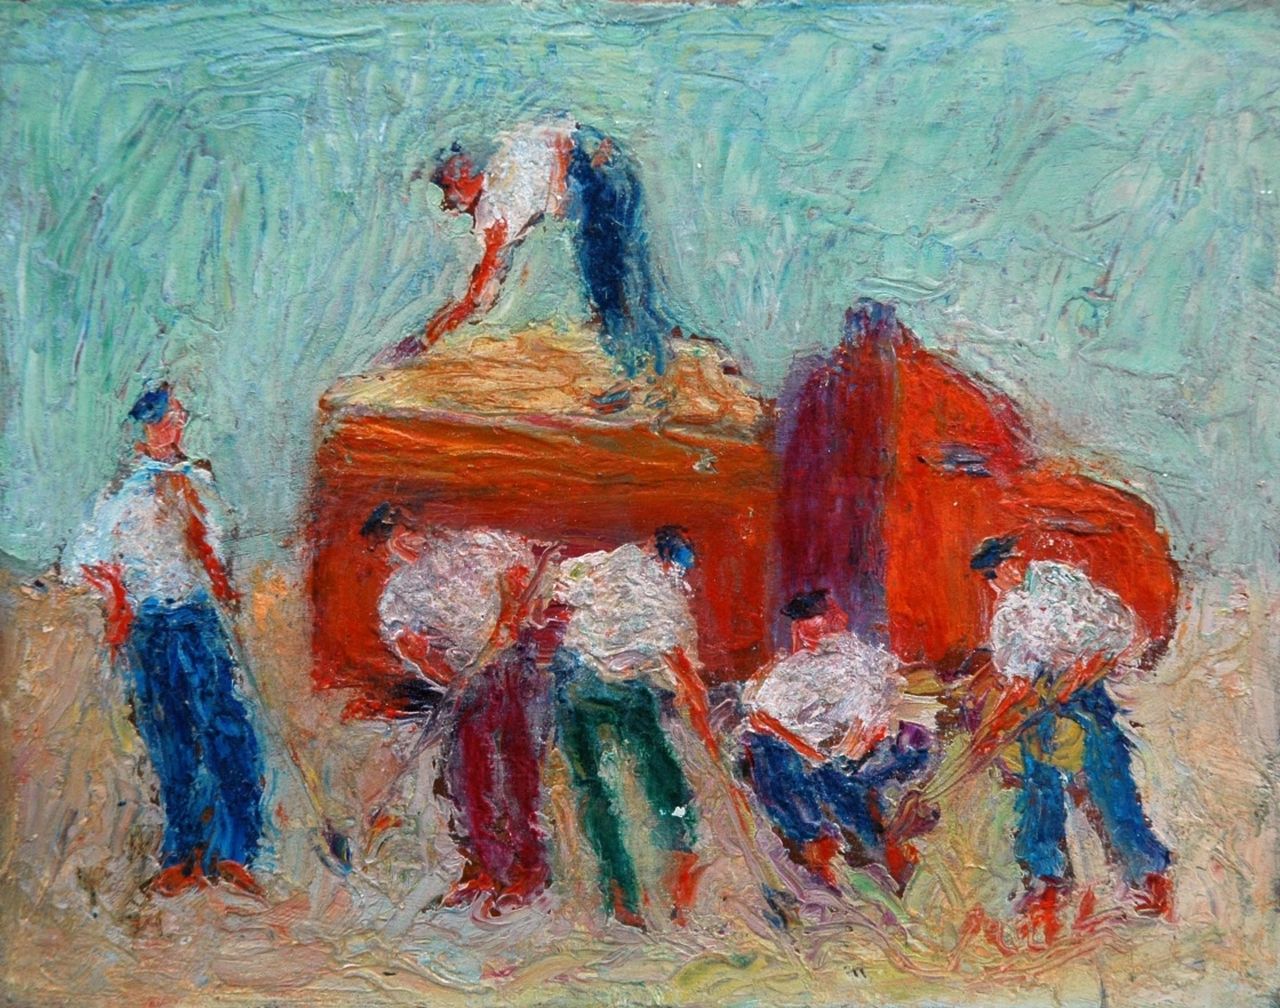 Banet R.  | Rodolphe Banet, Loading the truck, Öl auf Holzfaser 13,7 x 17,5 cm, signed l.l. and reverse und datiert '24